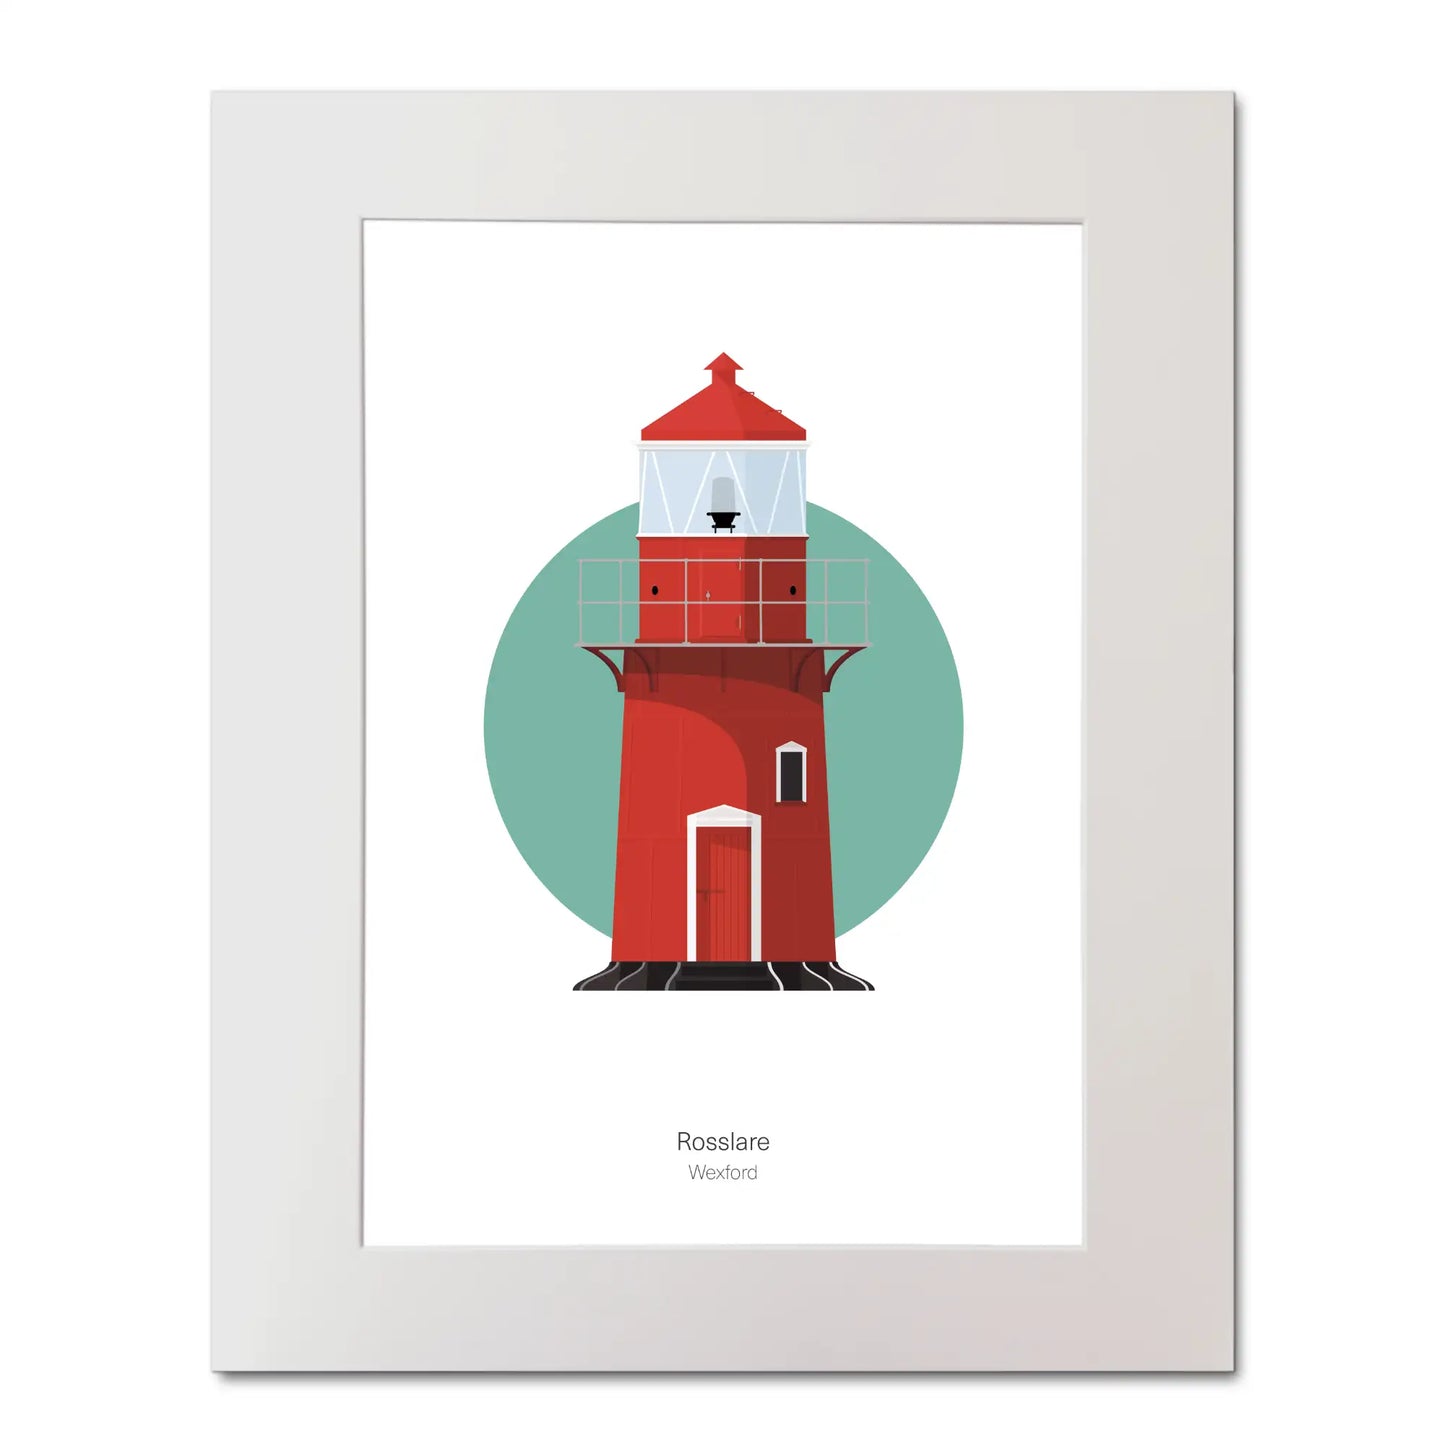 Illustration of Rosslare Harbour lighthouse on a white background inside light blue square, mounted and measuring 40x50cm.